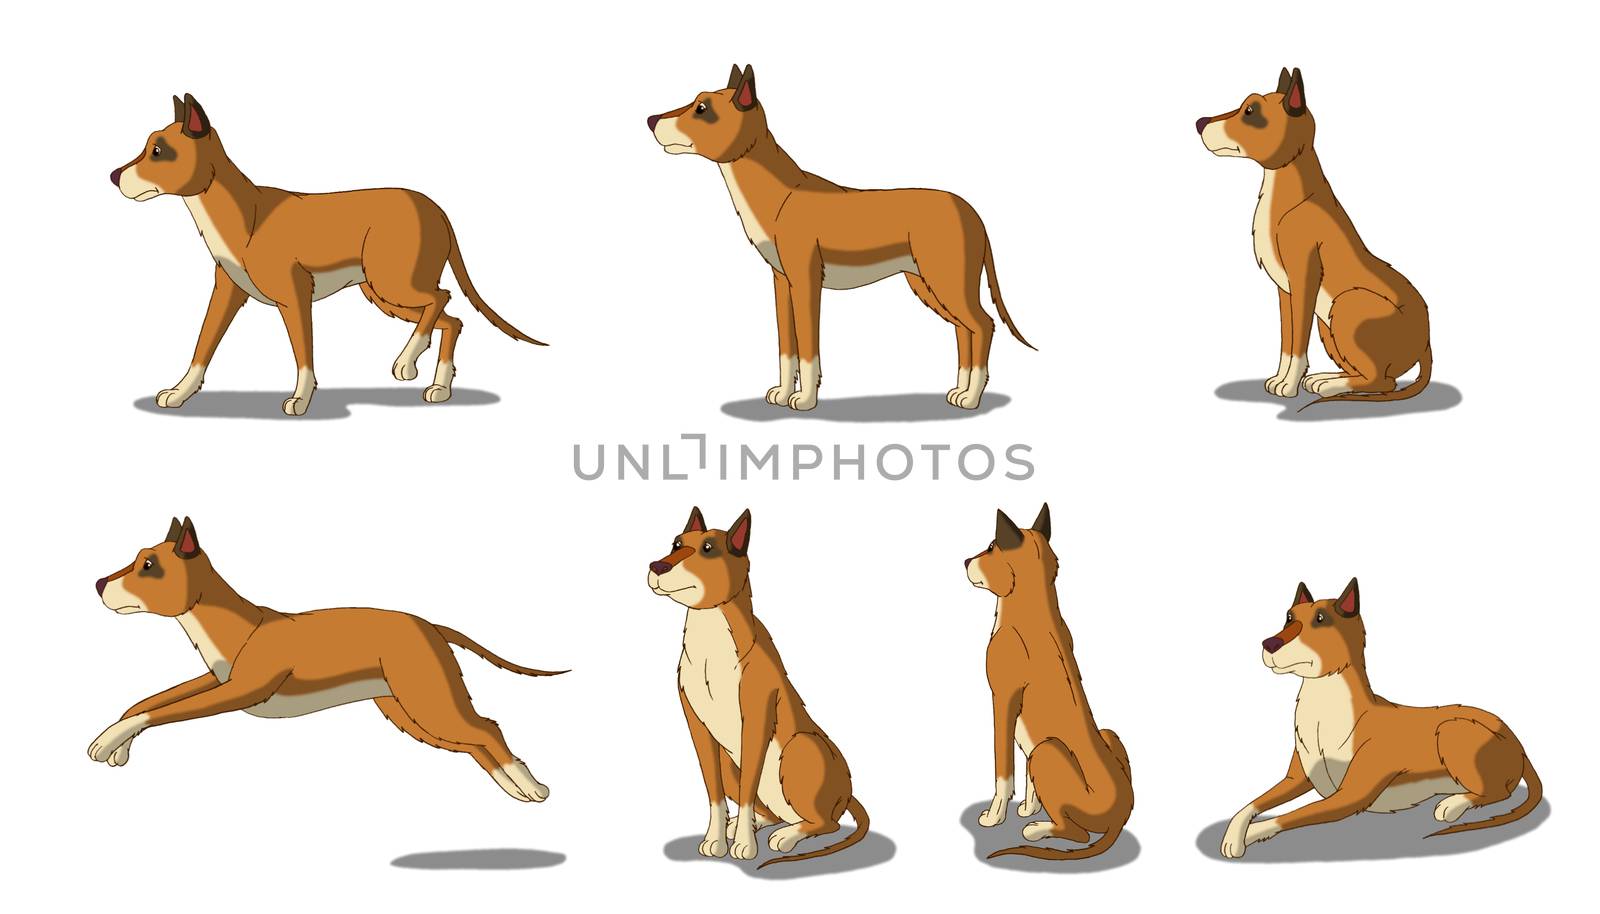 Set of Brown Dog images.  Digital painting  full color cartoon style illustration isolated on white background.